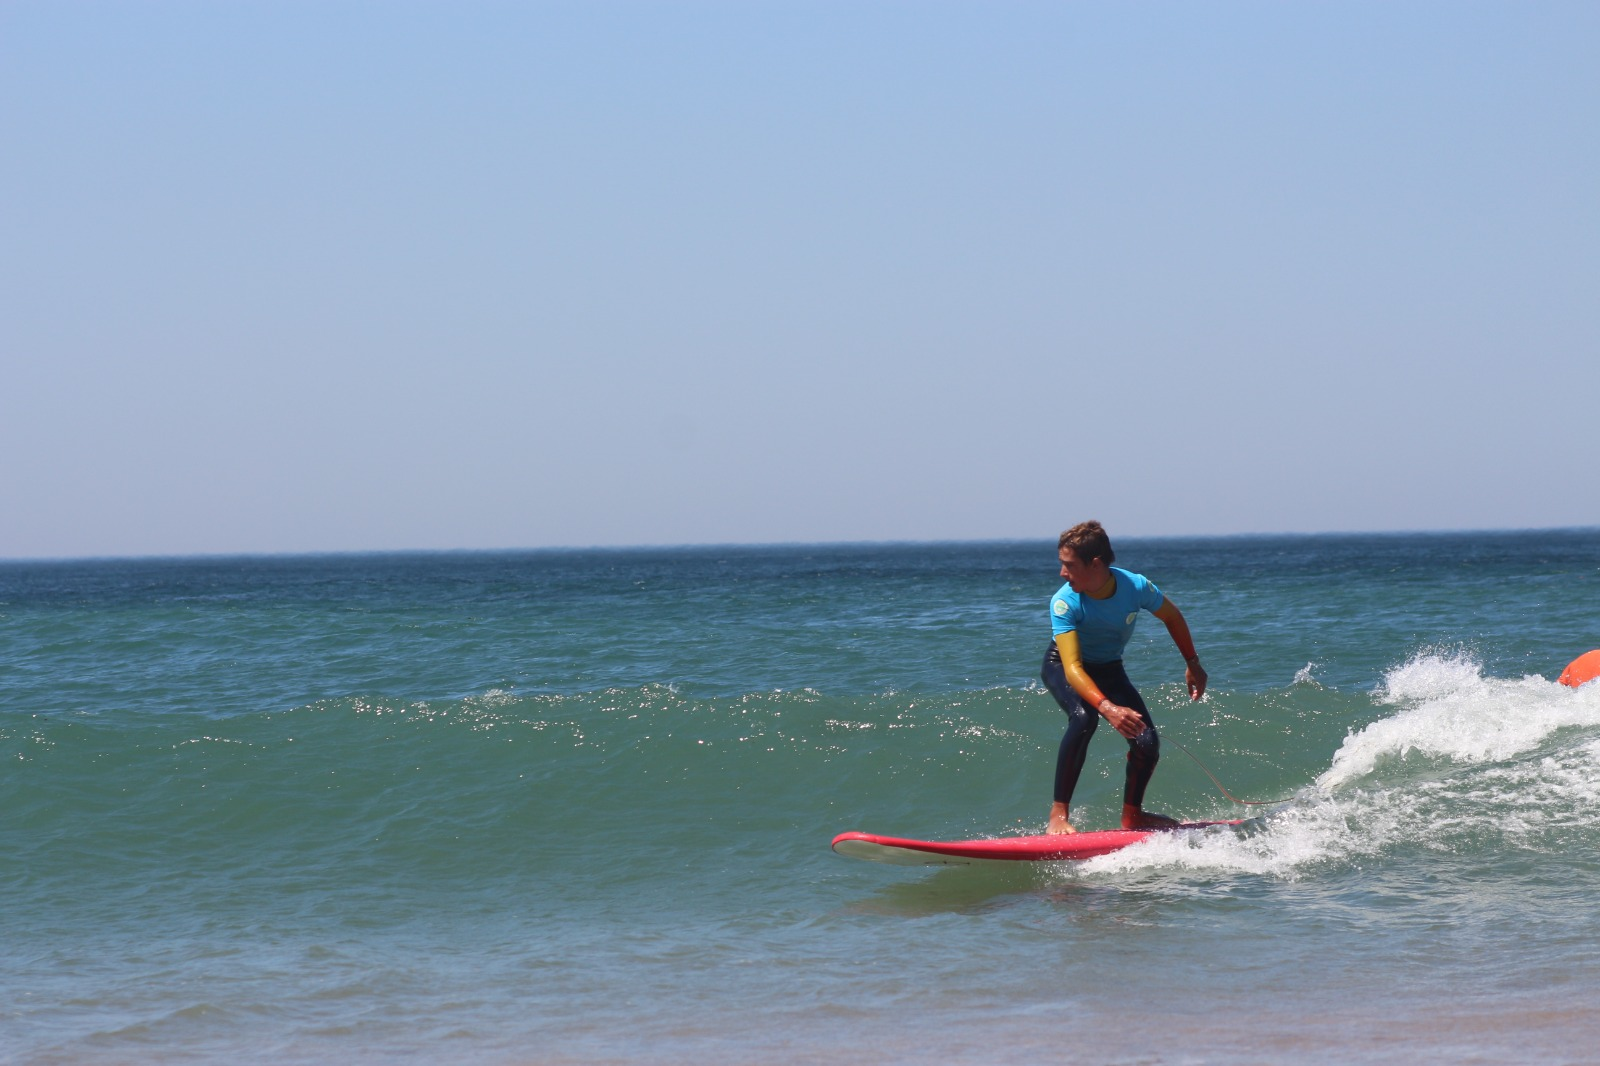 Beginner surfer with confidence